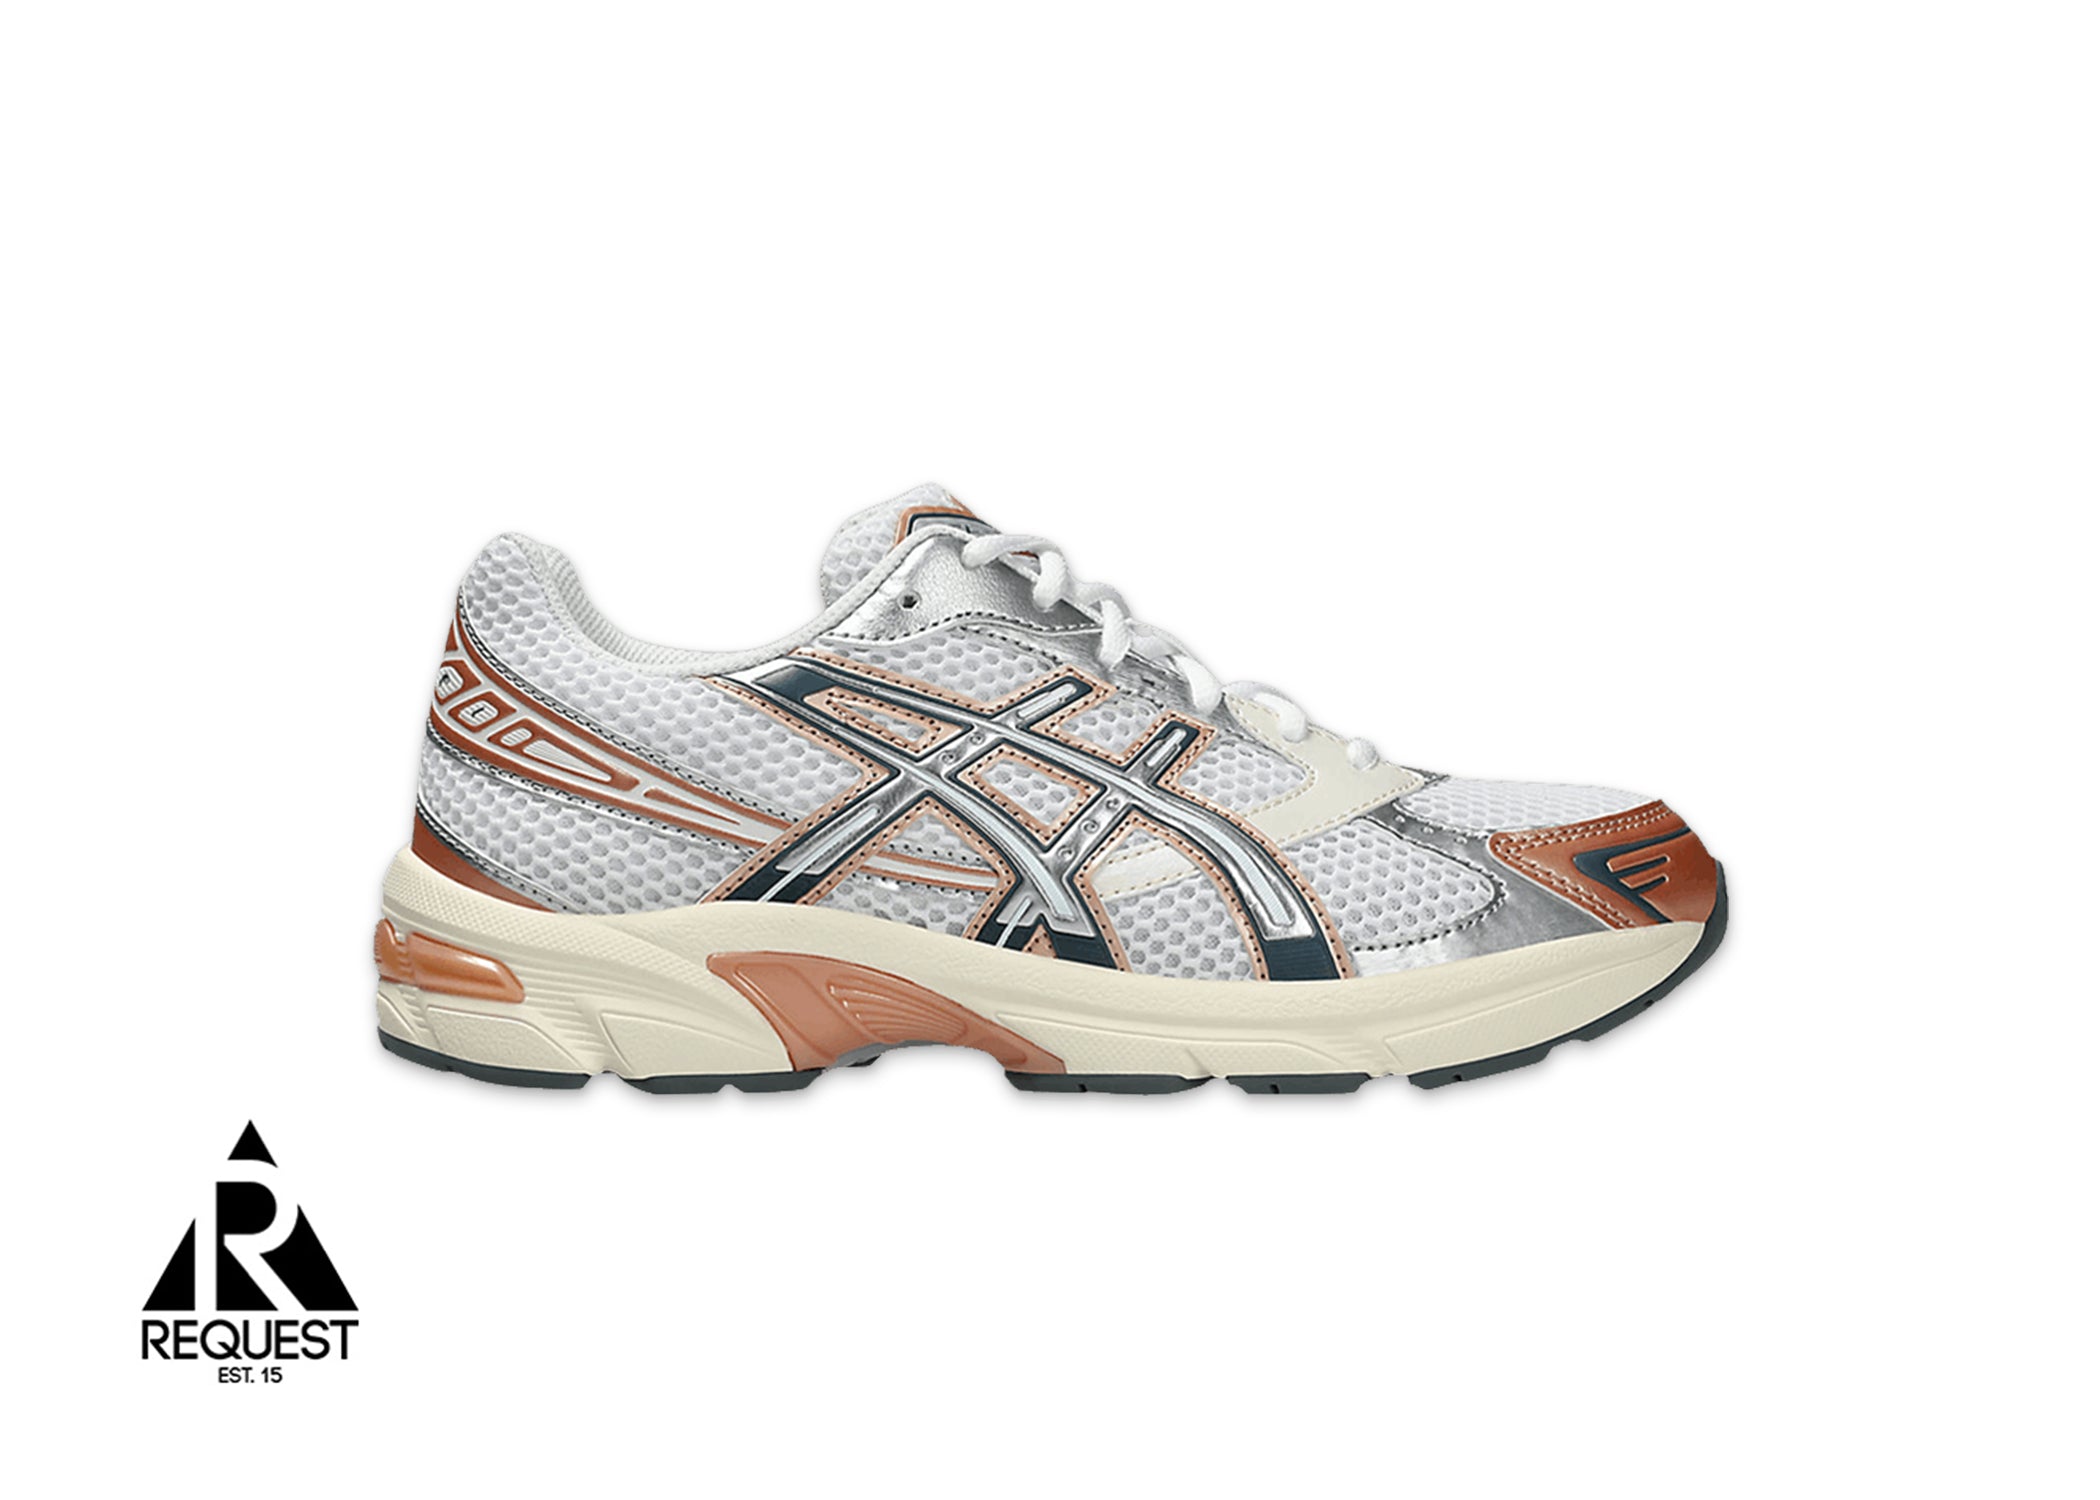 ASICS Gel-1130 "White Pure Silver Nude" (W)